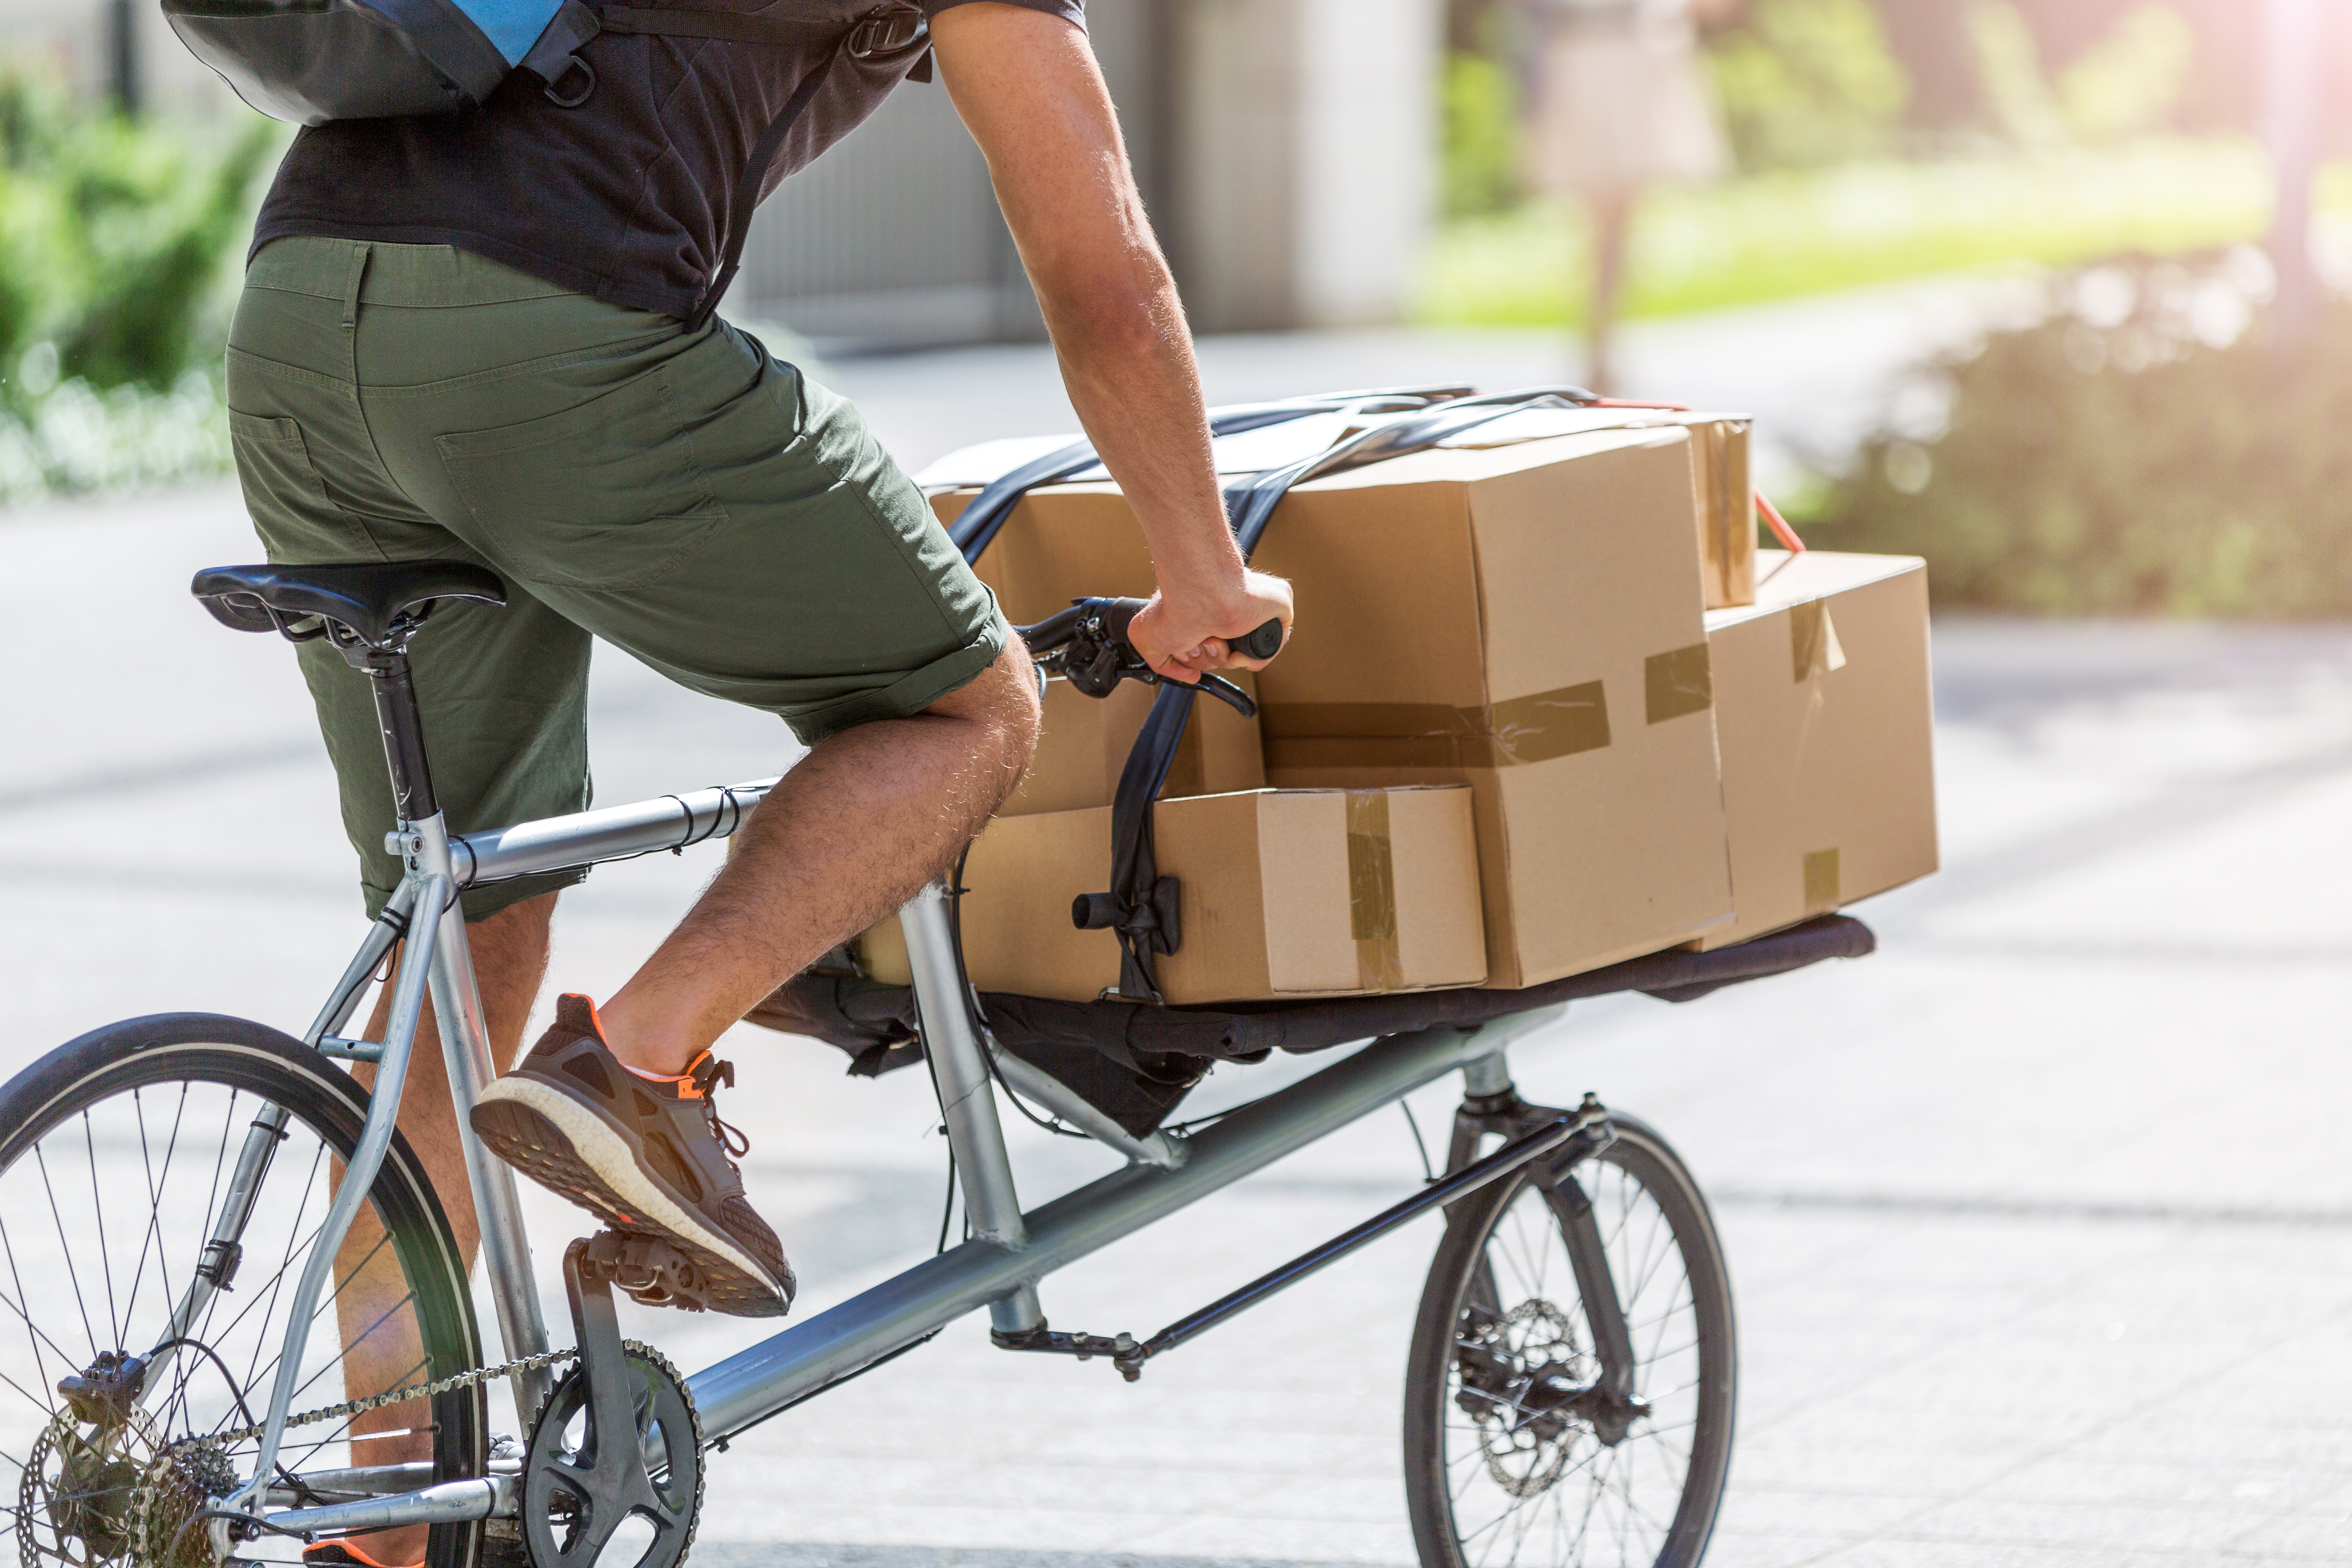 Research on purchase of cargo bikes published by TU Munich